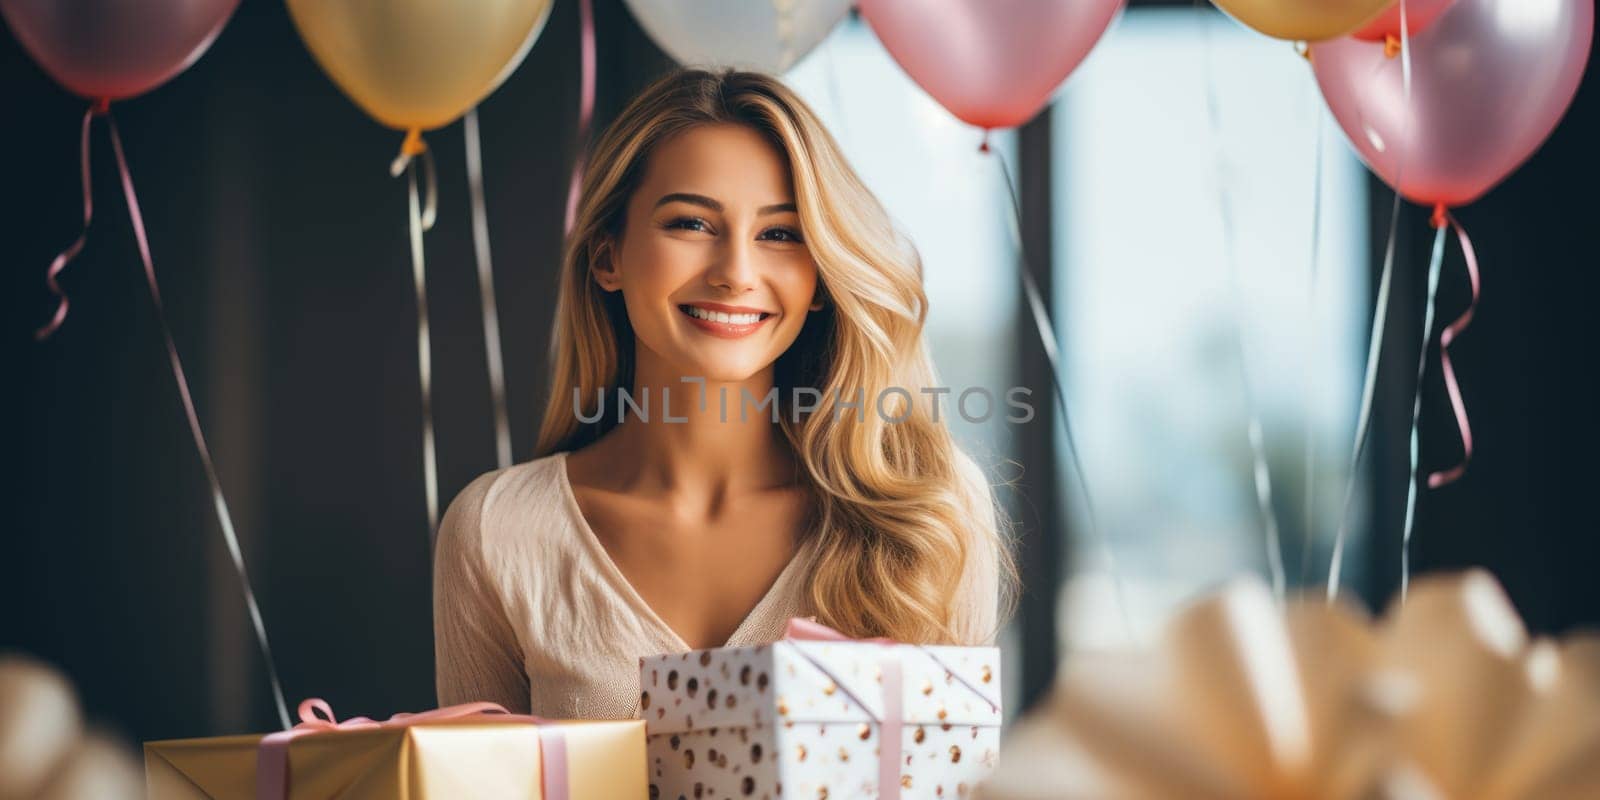 People, joy, fun and happiness concept. happy caucasian birthday man holding with gift box, balloons in the background. AI Generated